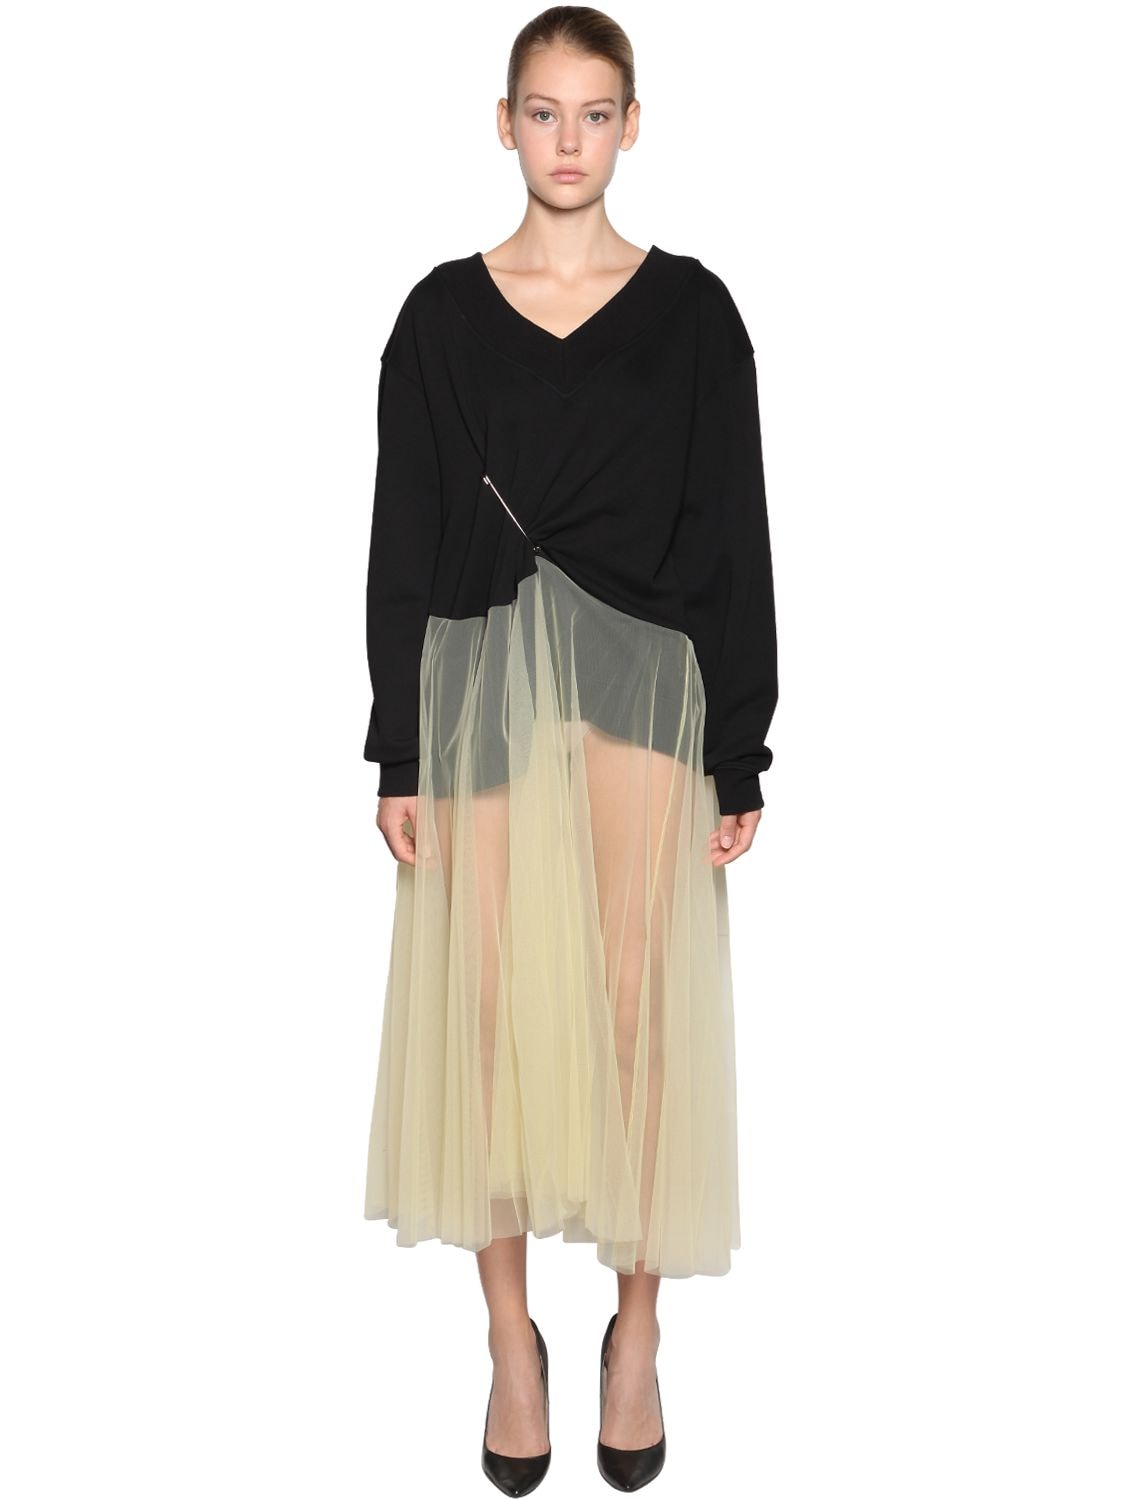 Act N°1 Cotton Sweater W/ Tulle Skirt Dress In Black,yellow